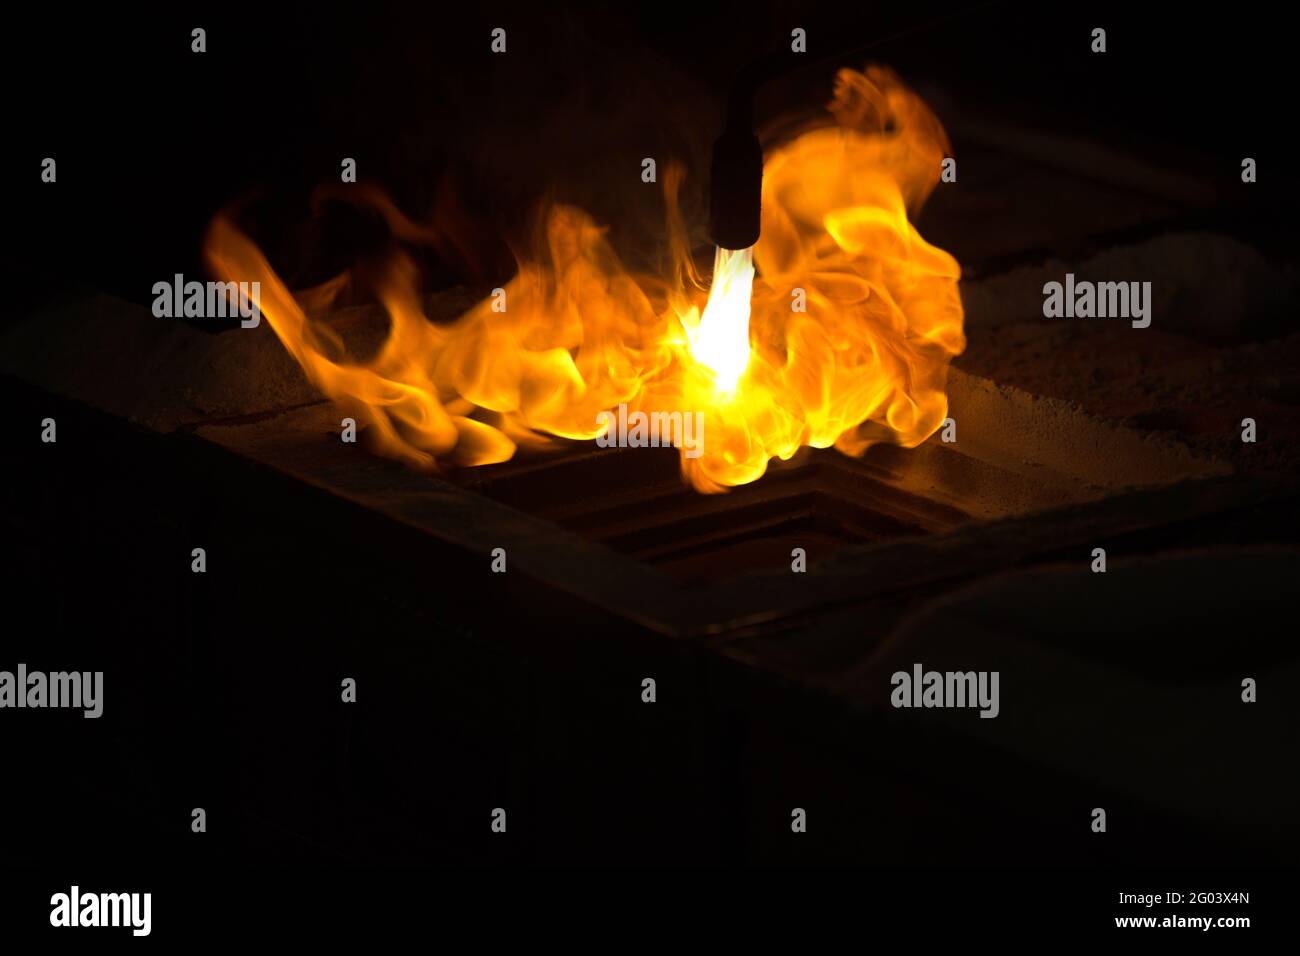 Flames shooting out in the process of casting glass art. Stock Photo